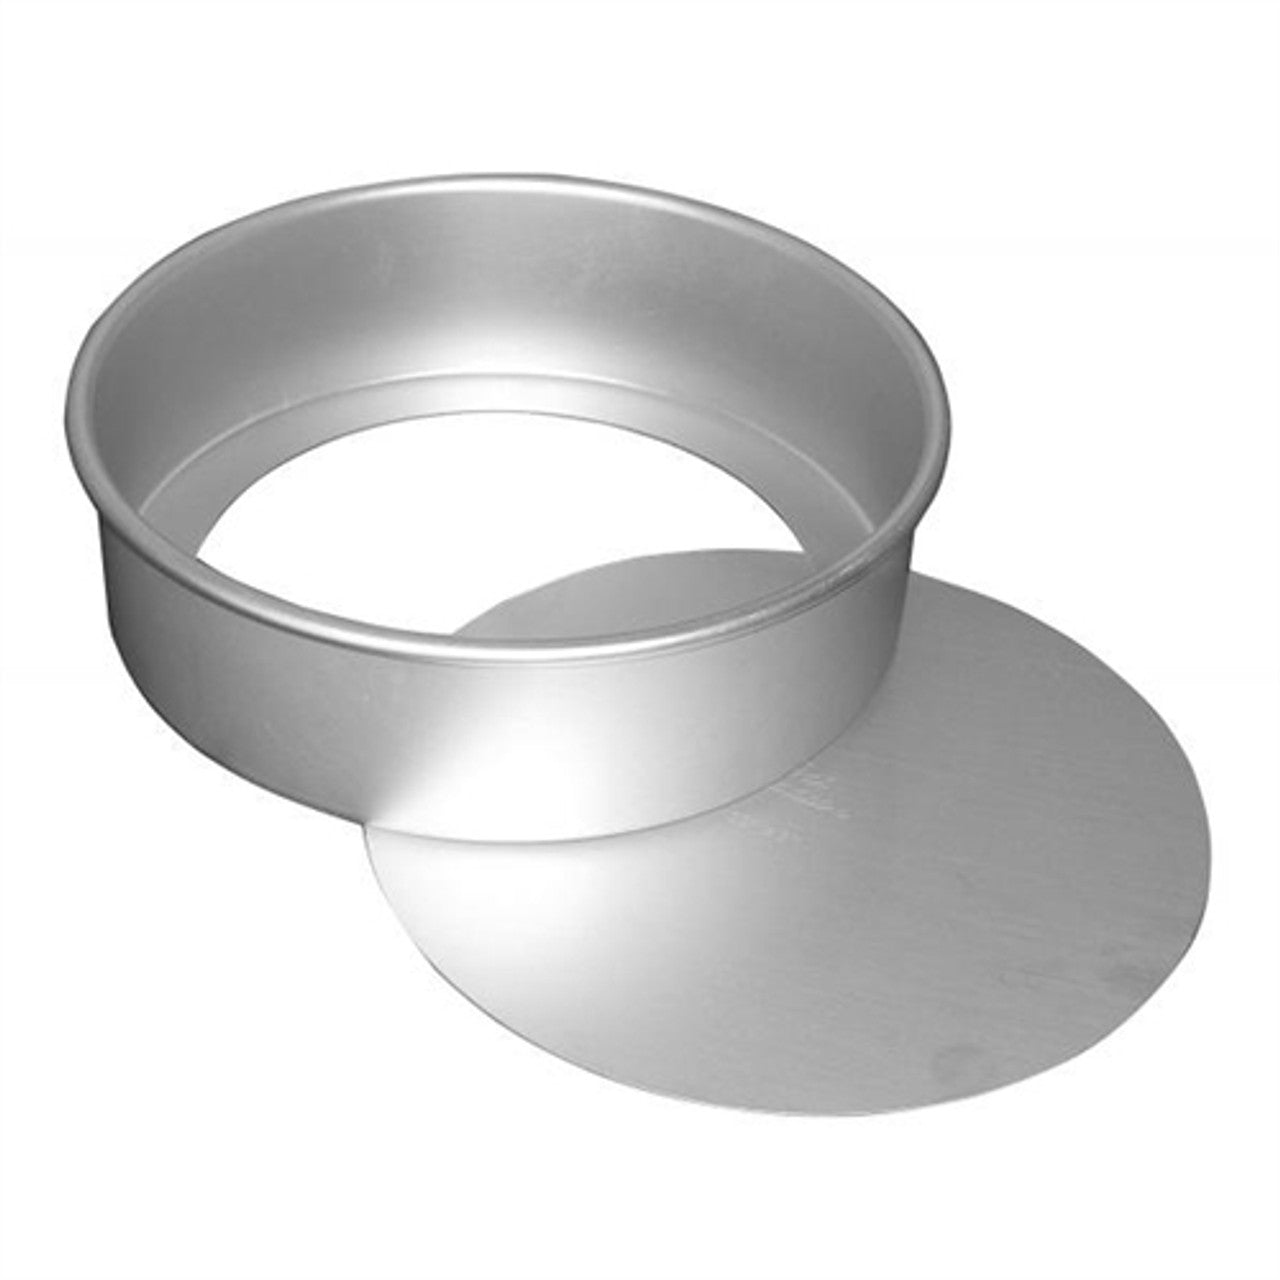 5" X 2"  ROUND CHEESECAKE PAN, REMOVABLE BOTTOM